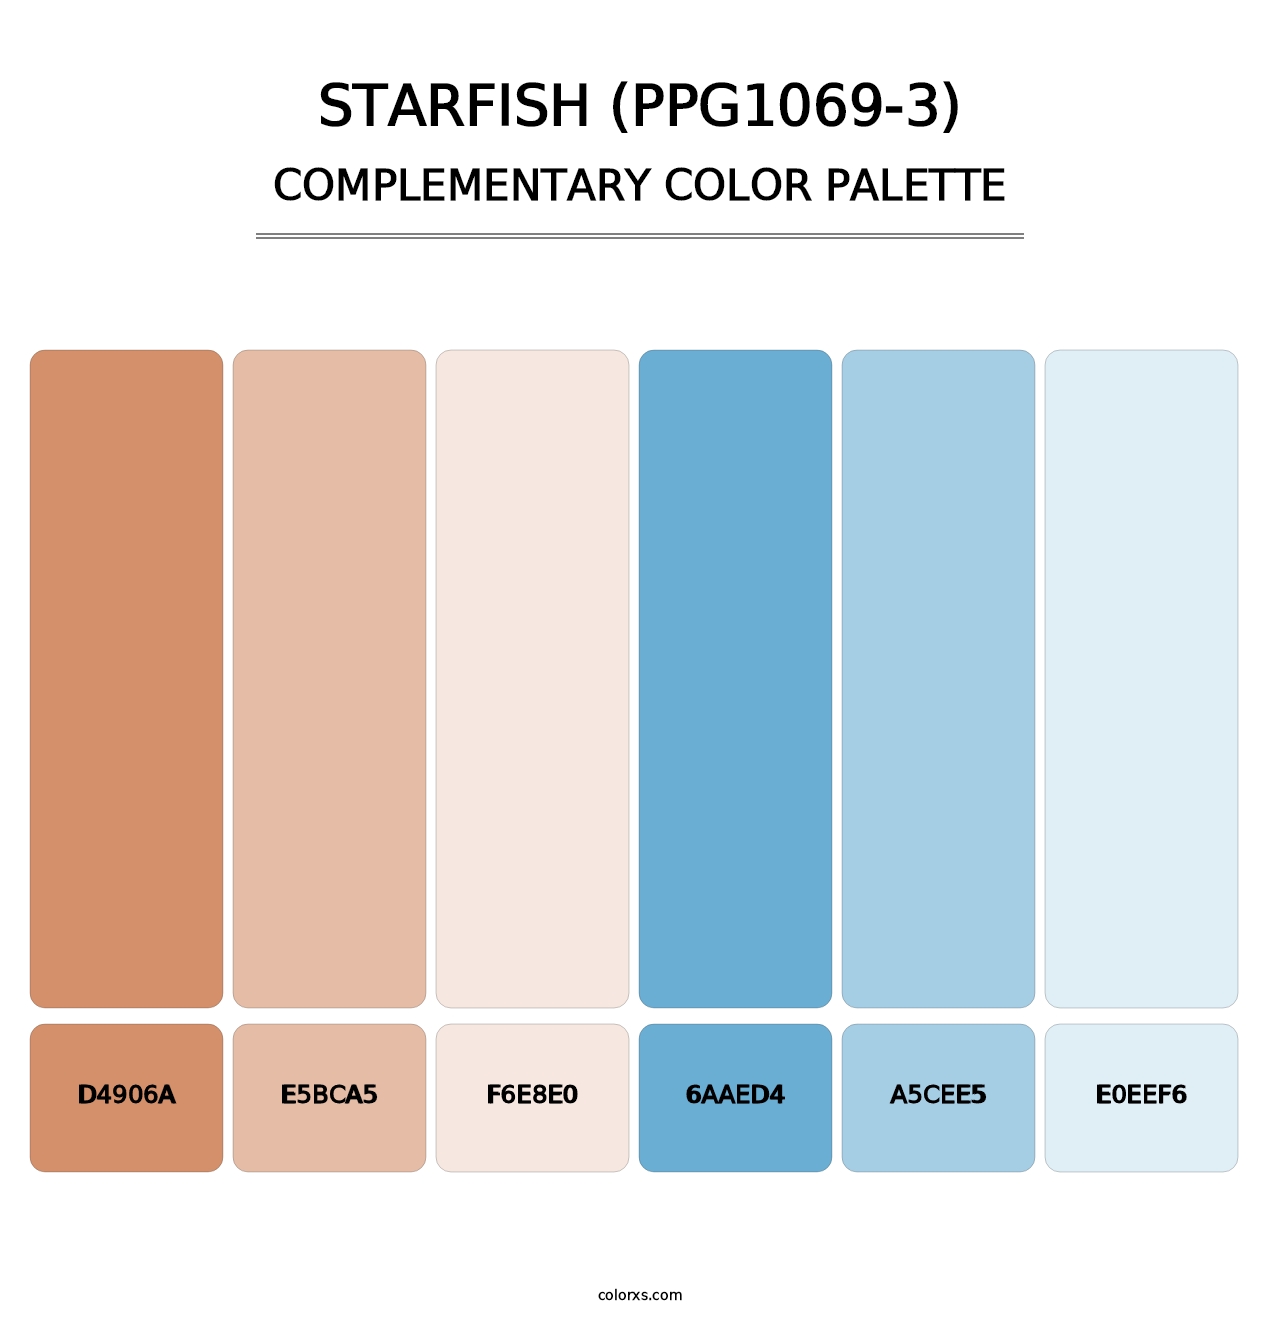 Starfish (PPG1069-3) - Complementary Color Palette